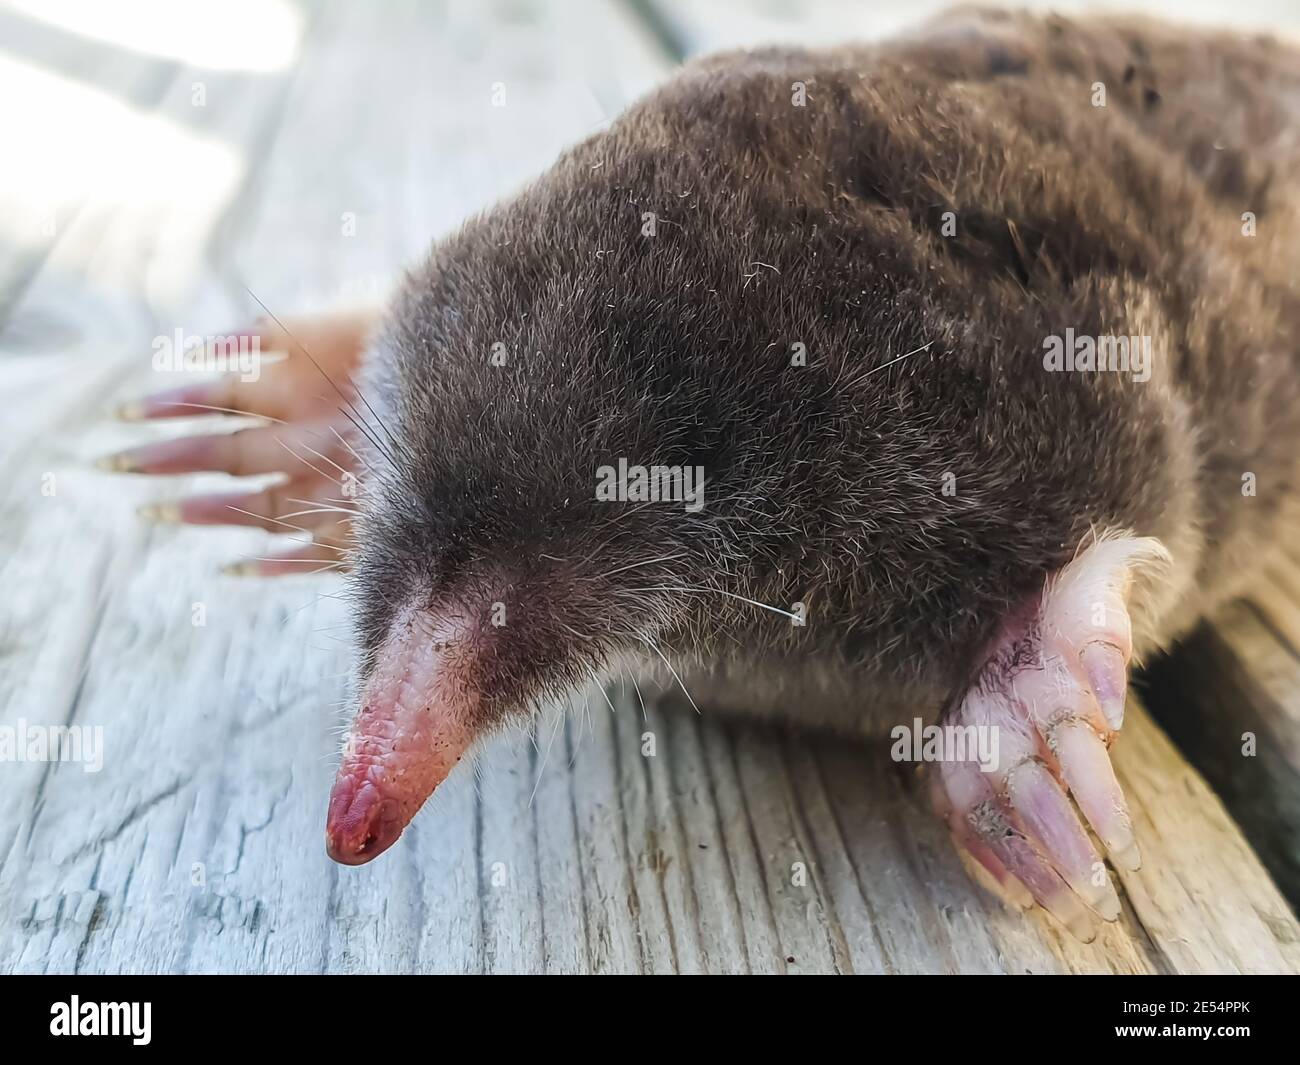 Close up shot of a little mole resting on his belly on the wooden planks of a patio, porch or veranda in a country house. Stock Photo